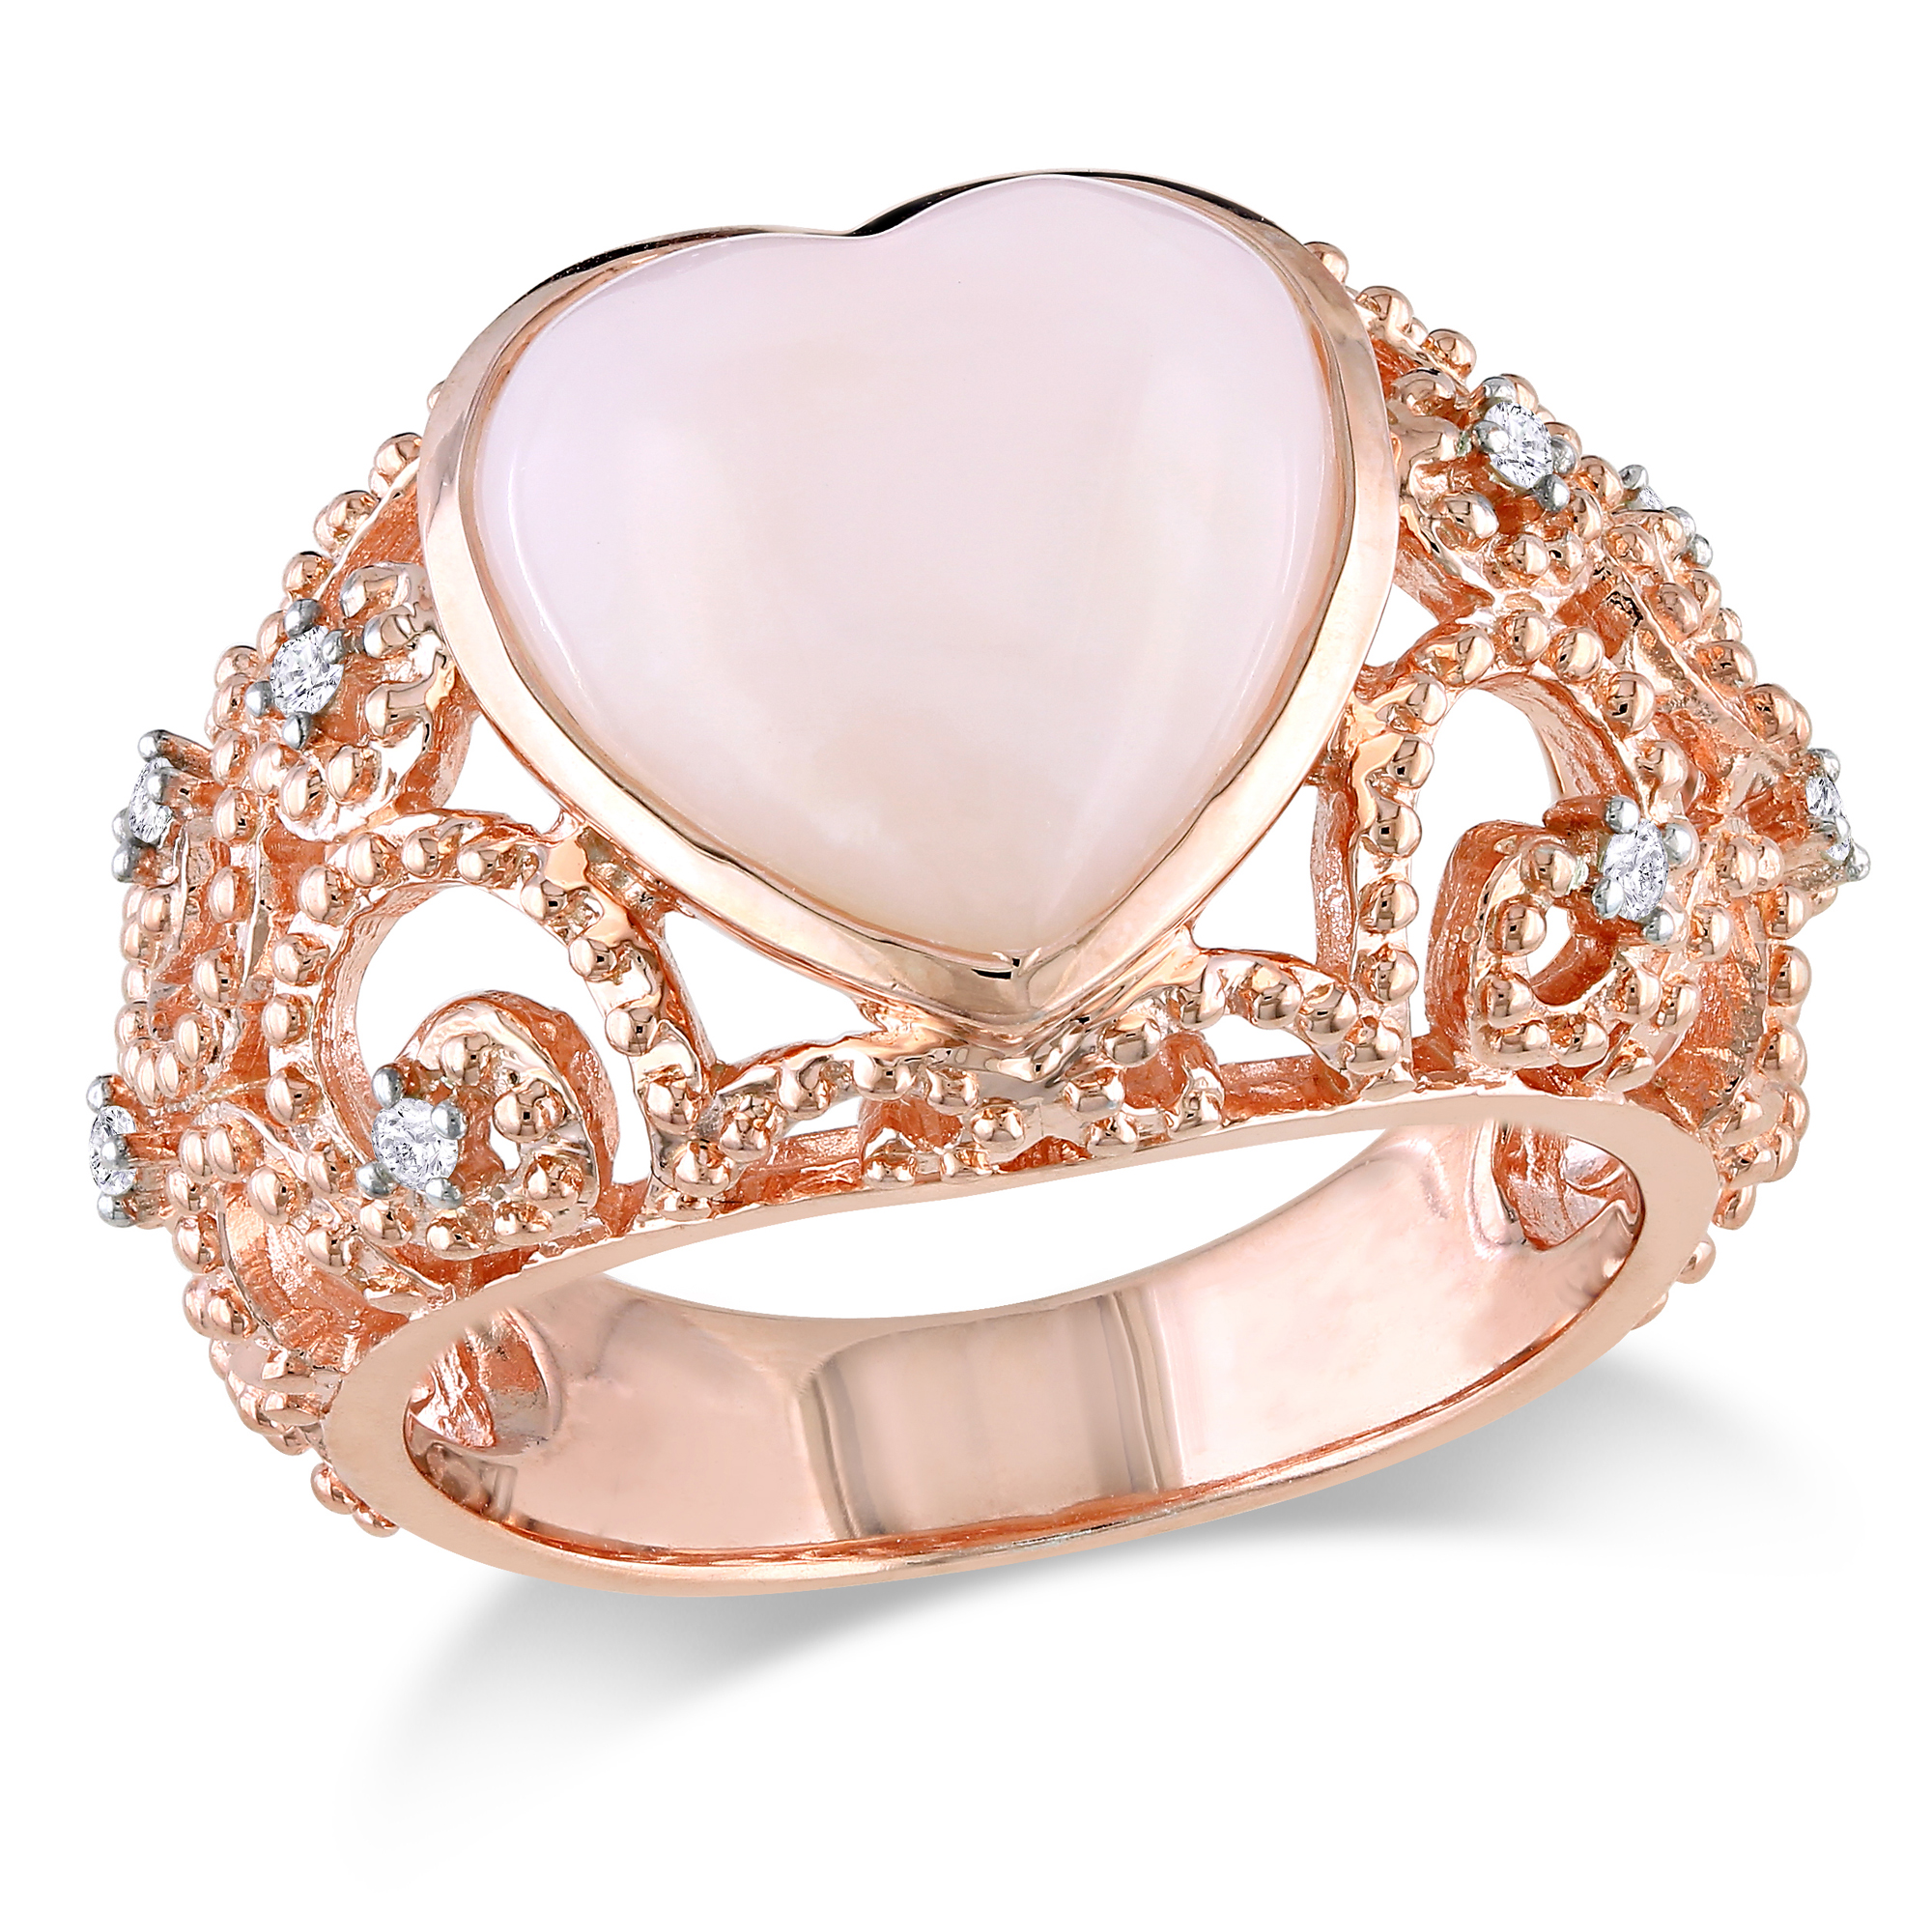 Amour 1/10 Carat T.W. Diamond and 4 1/4 Carat T.G.W. Pink Opal Fashion Ring Pink Sterling Silver GH I3